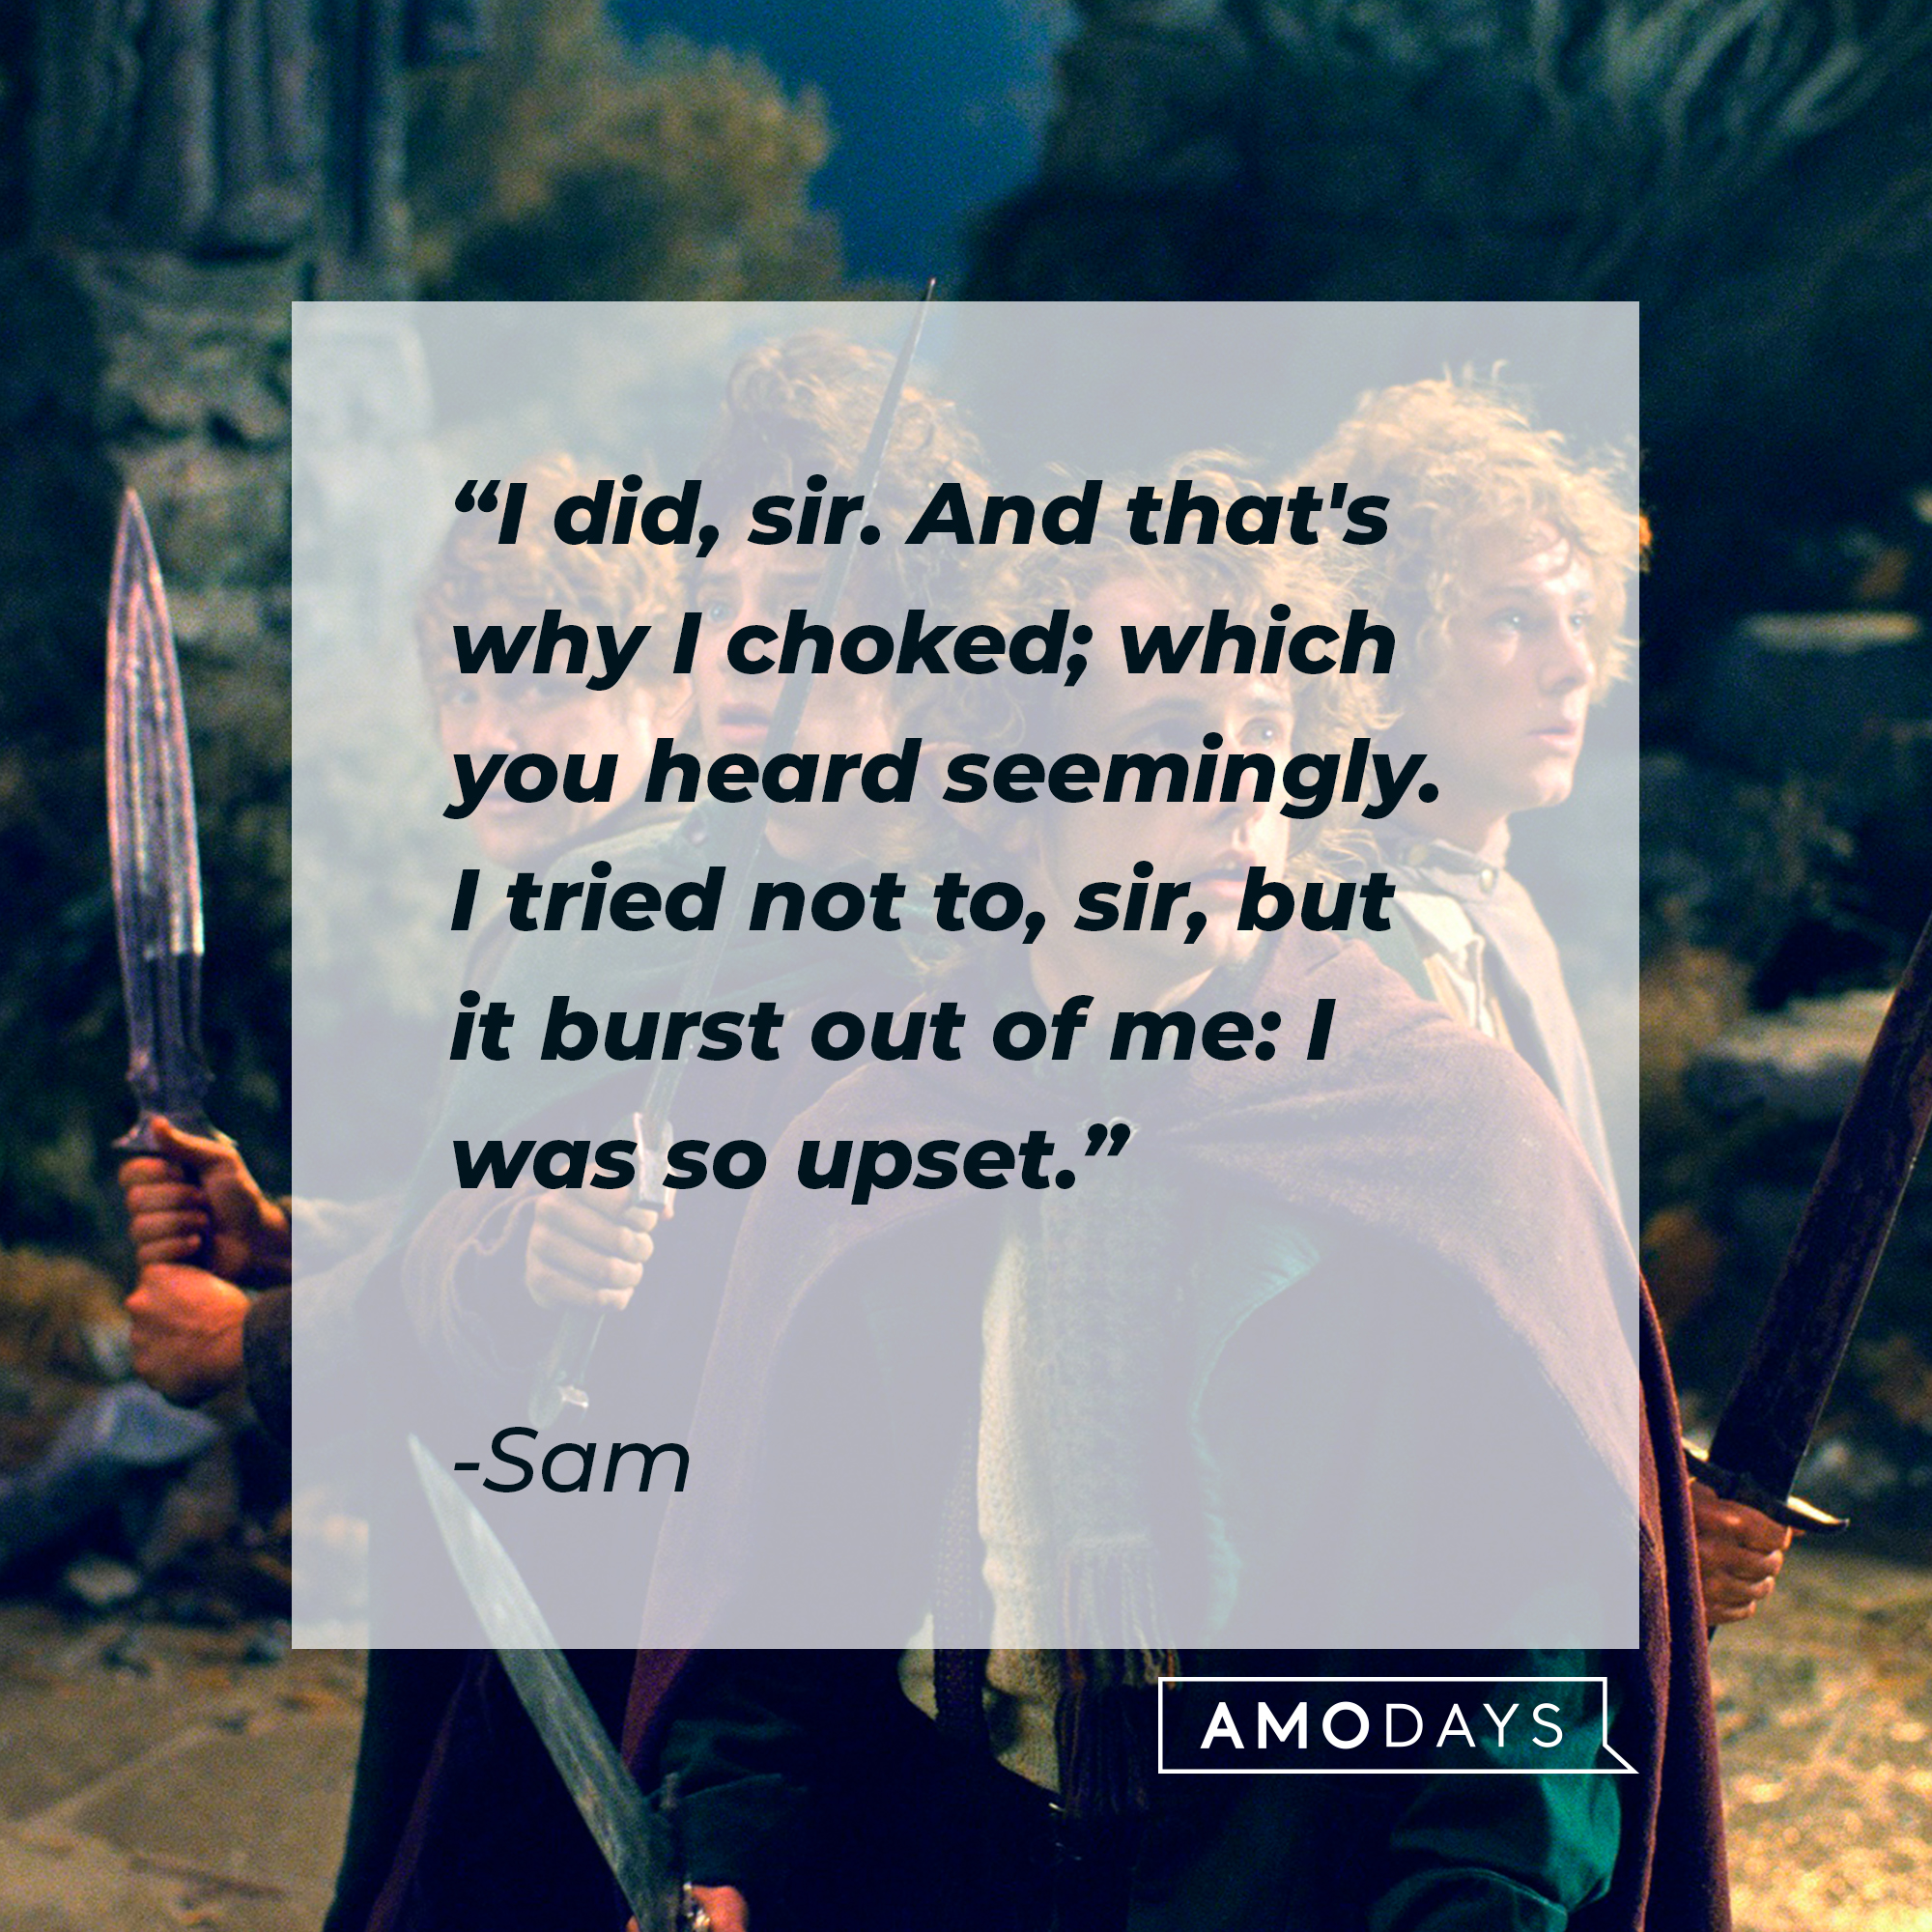 Sam's quote: "I did, sir. And that's why I choked; which you heard seemingly. I tried not to, sir, but it burst out of me: I was so upset." | Source: facebook.com/lordoftheringstrilogy